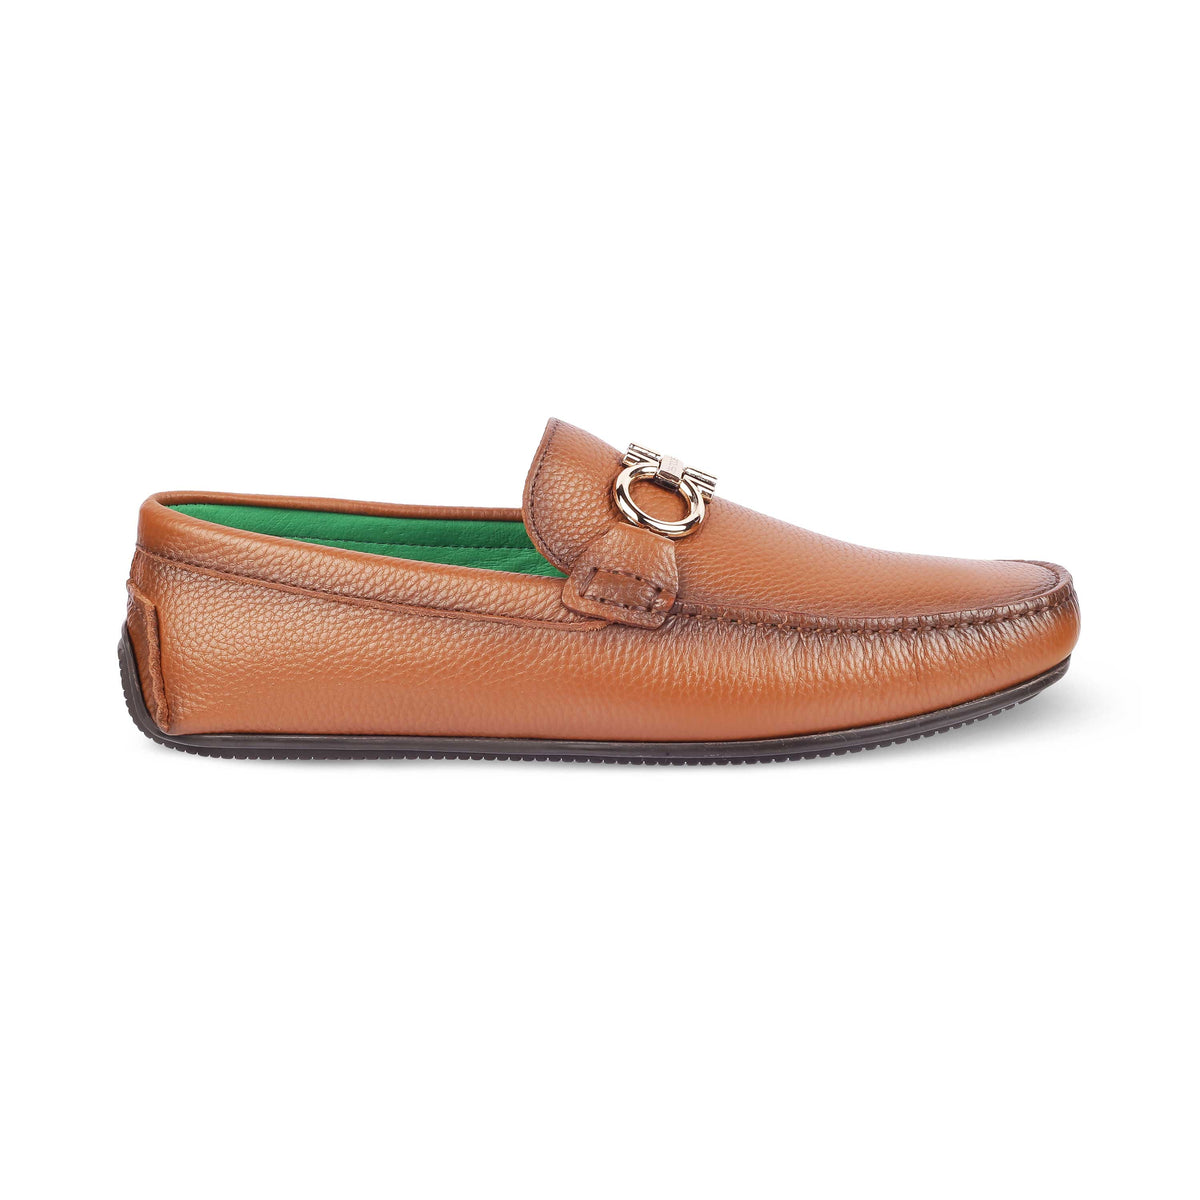 Tresmode Stpierre Camel Men's Leather Driving Loafers - Tresmode